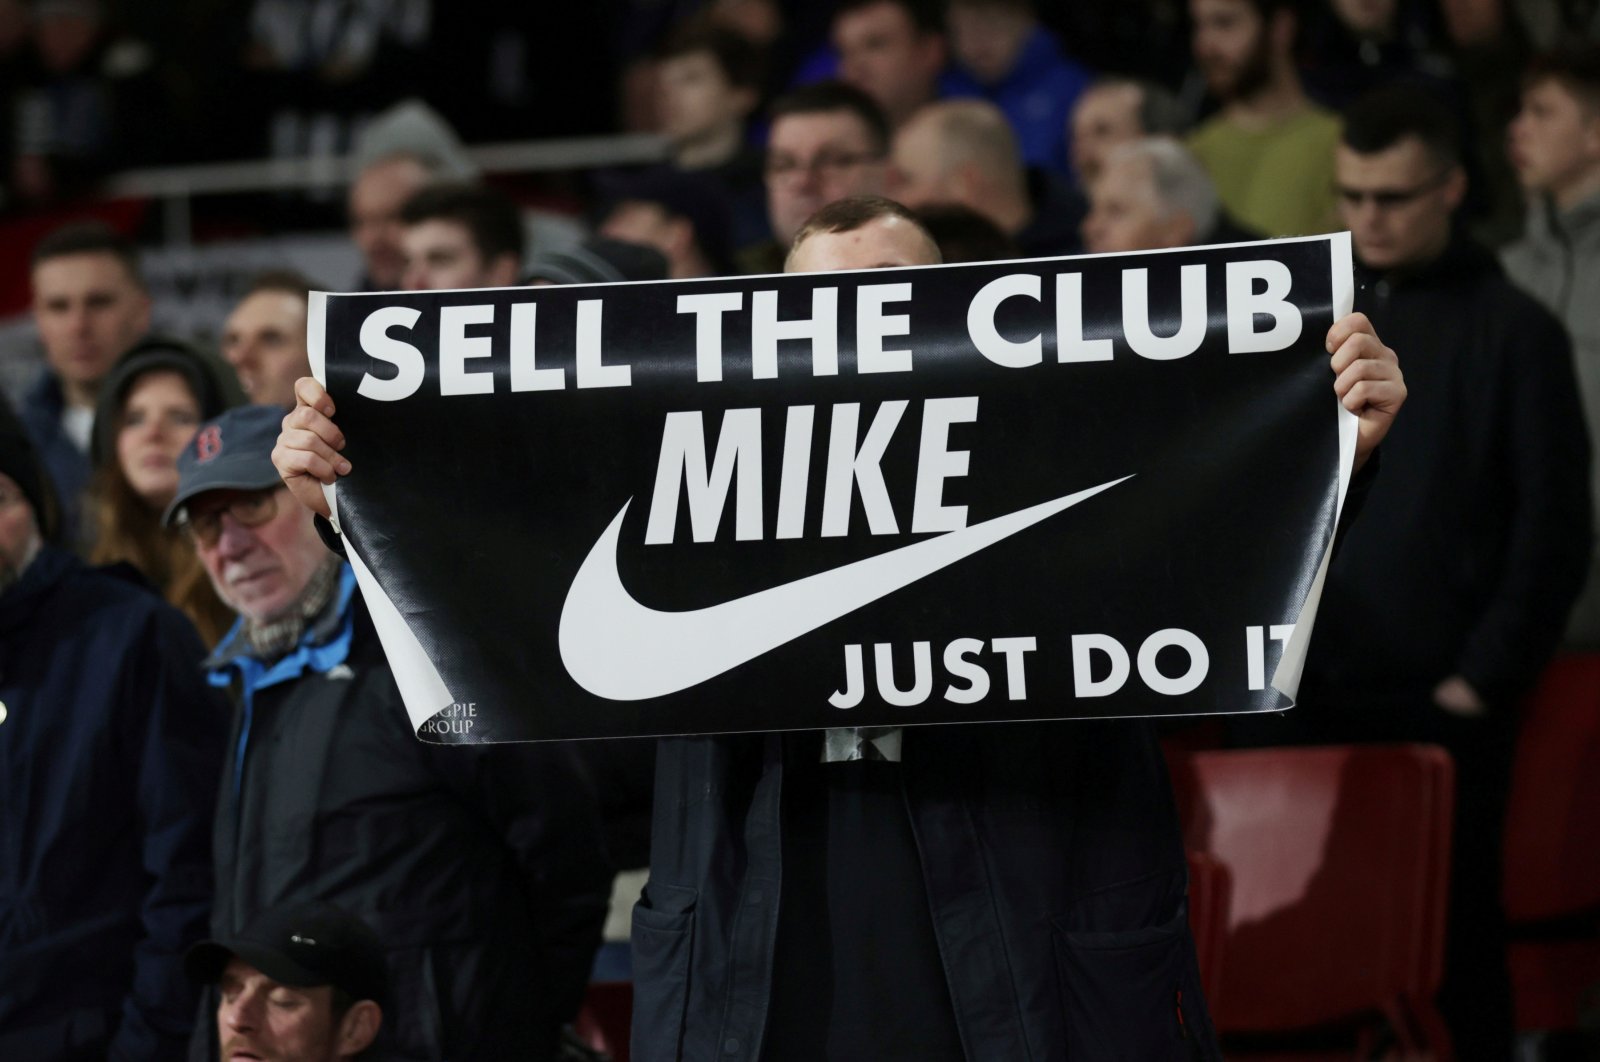 A fan displays a banner in reference to Newcastle United owner Mike Ashley during a match, in London, Britain, Feb. 16, 2020.  (Reuters Photo)